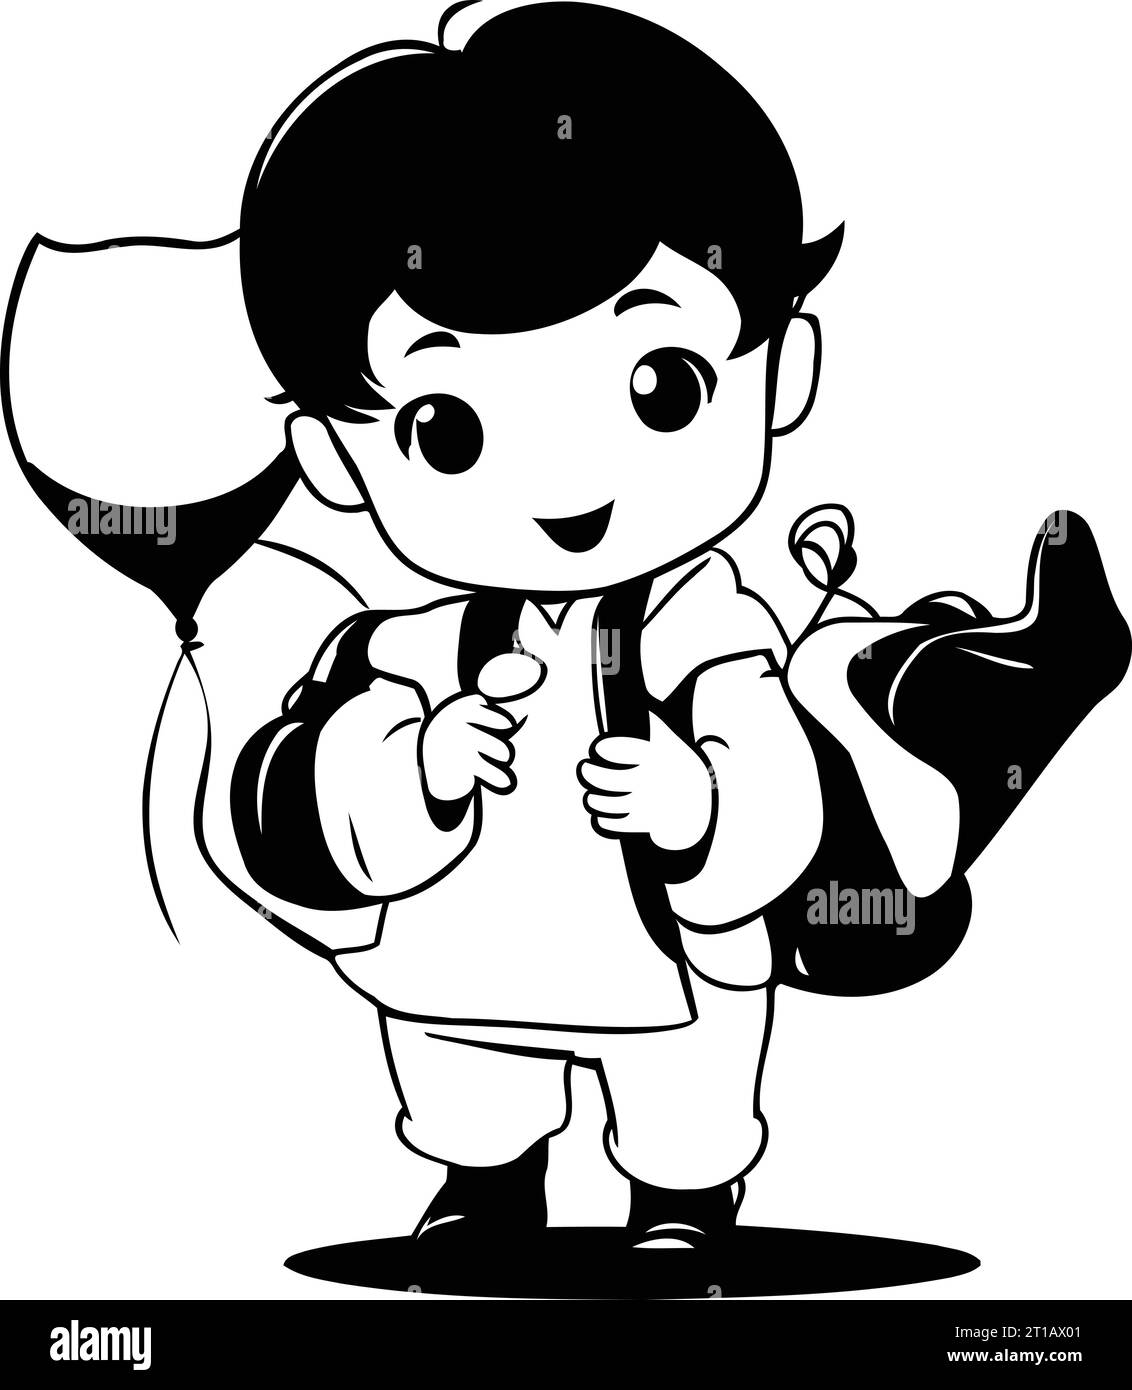 Cute schoolboy with backpack and books. Black and white vector illustration. Stock Vector